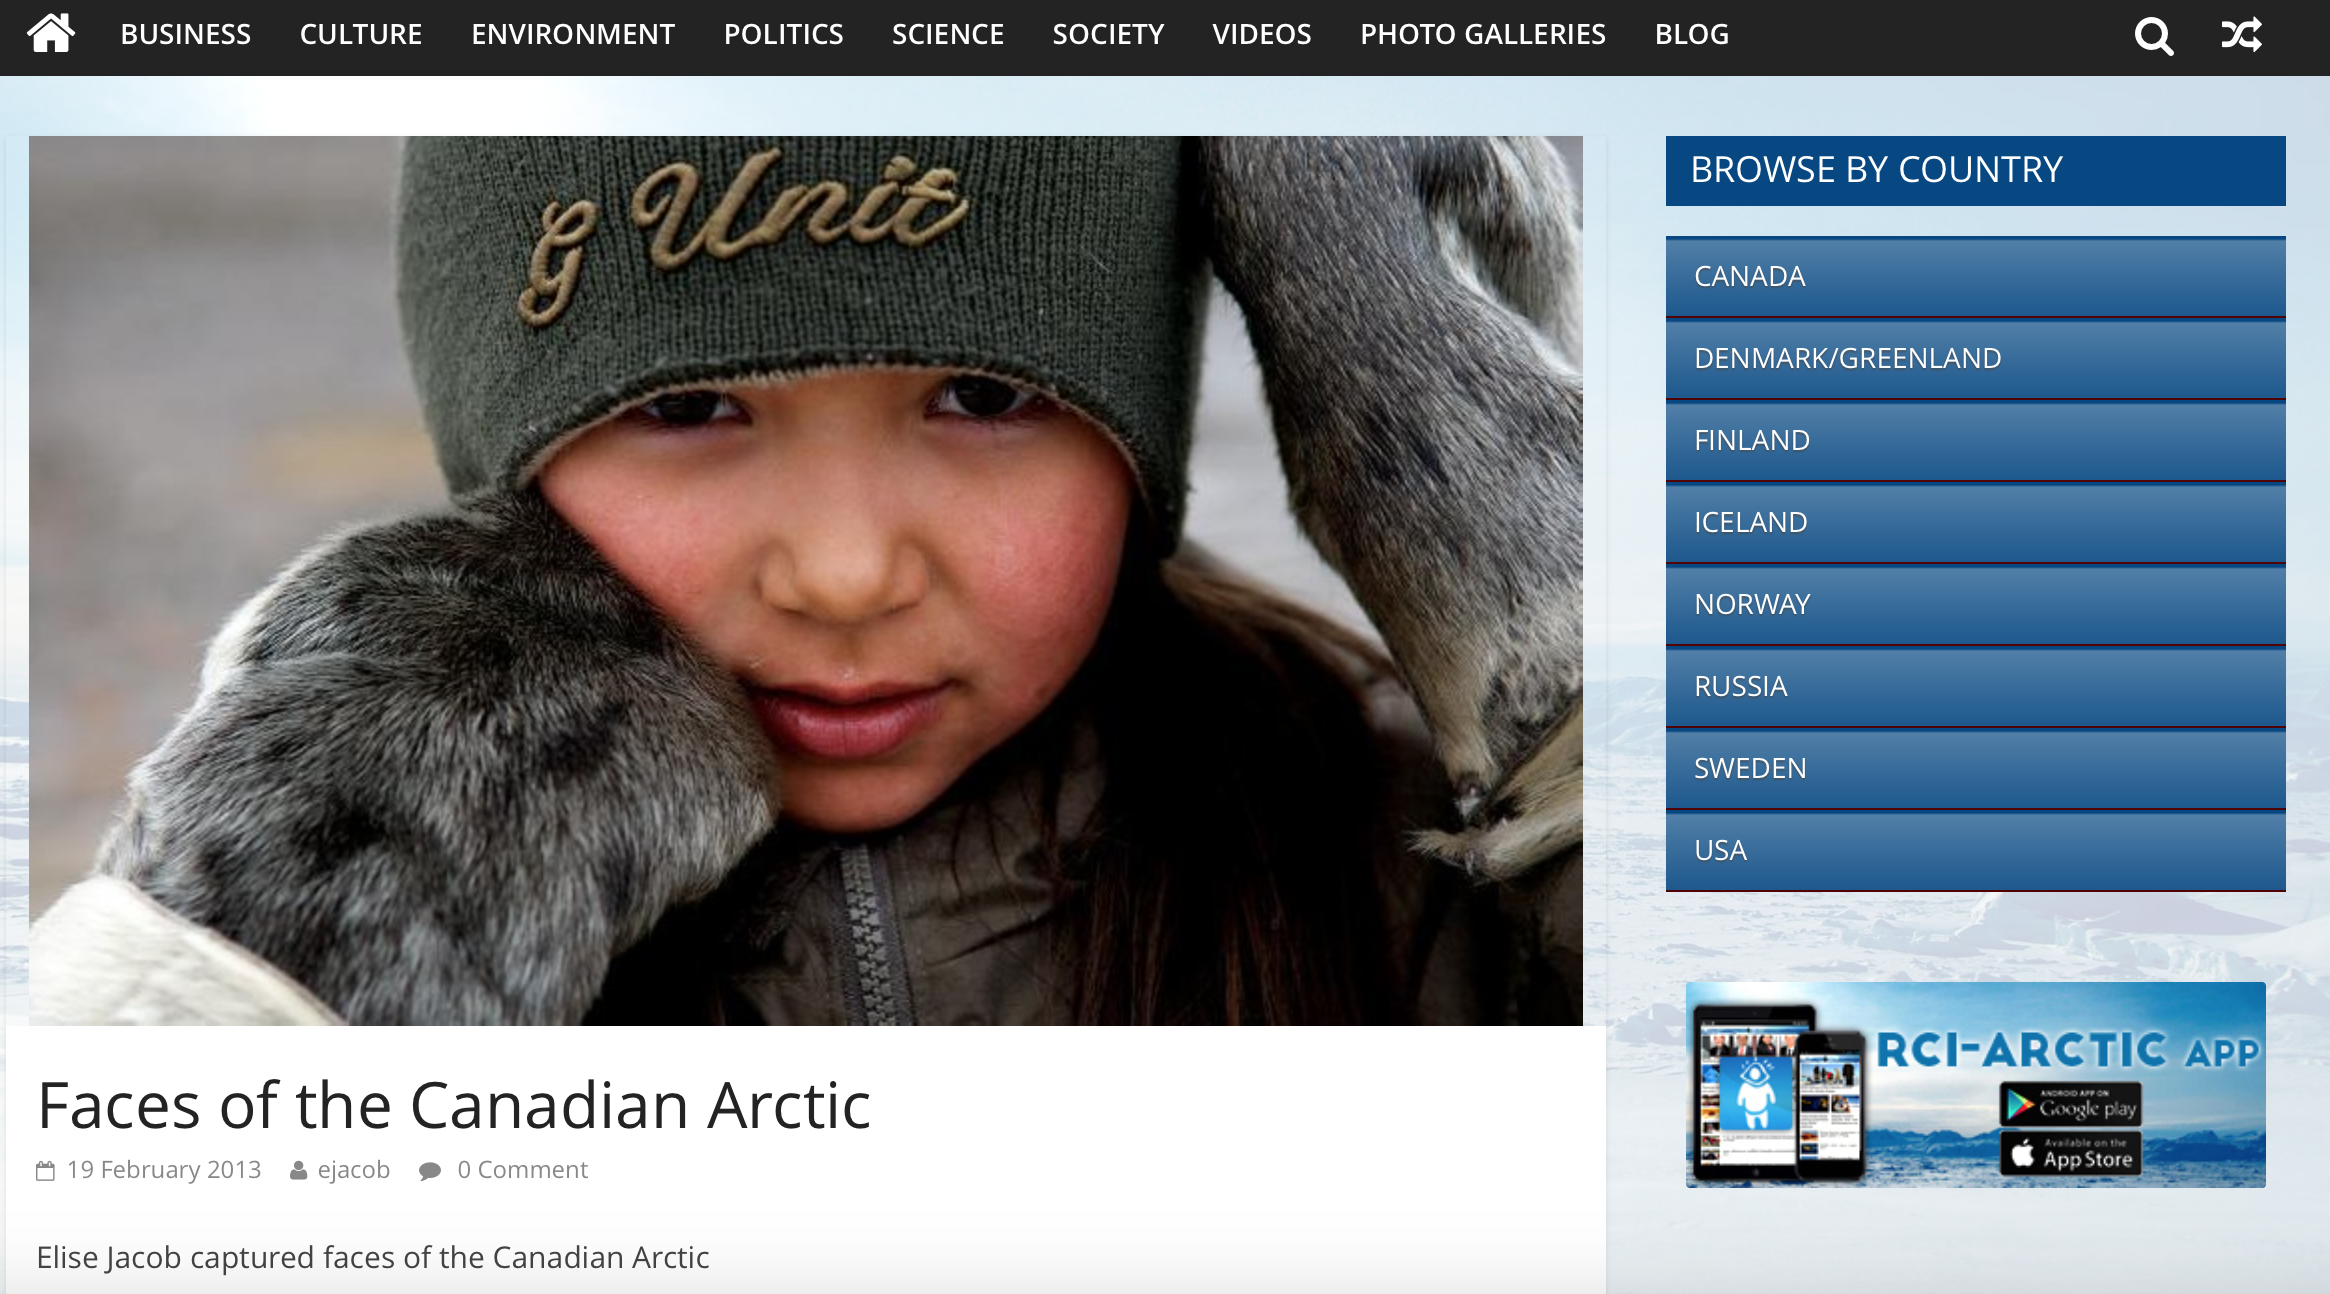 CBC.CA website: Faces Of The Canadian Arctic